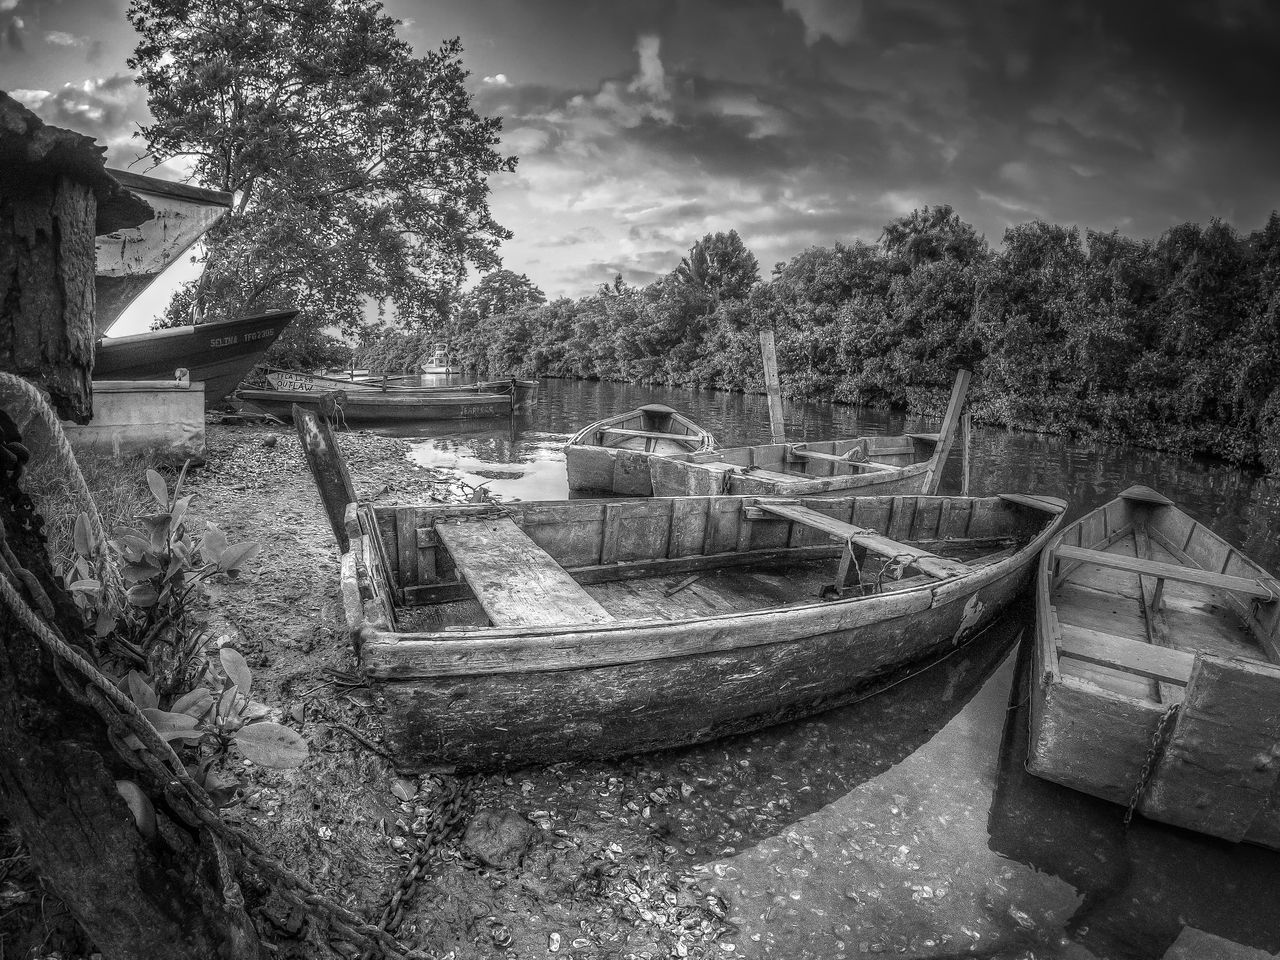 ABANDONED BOAT MOORED IN WATER